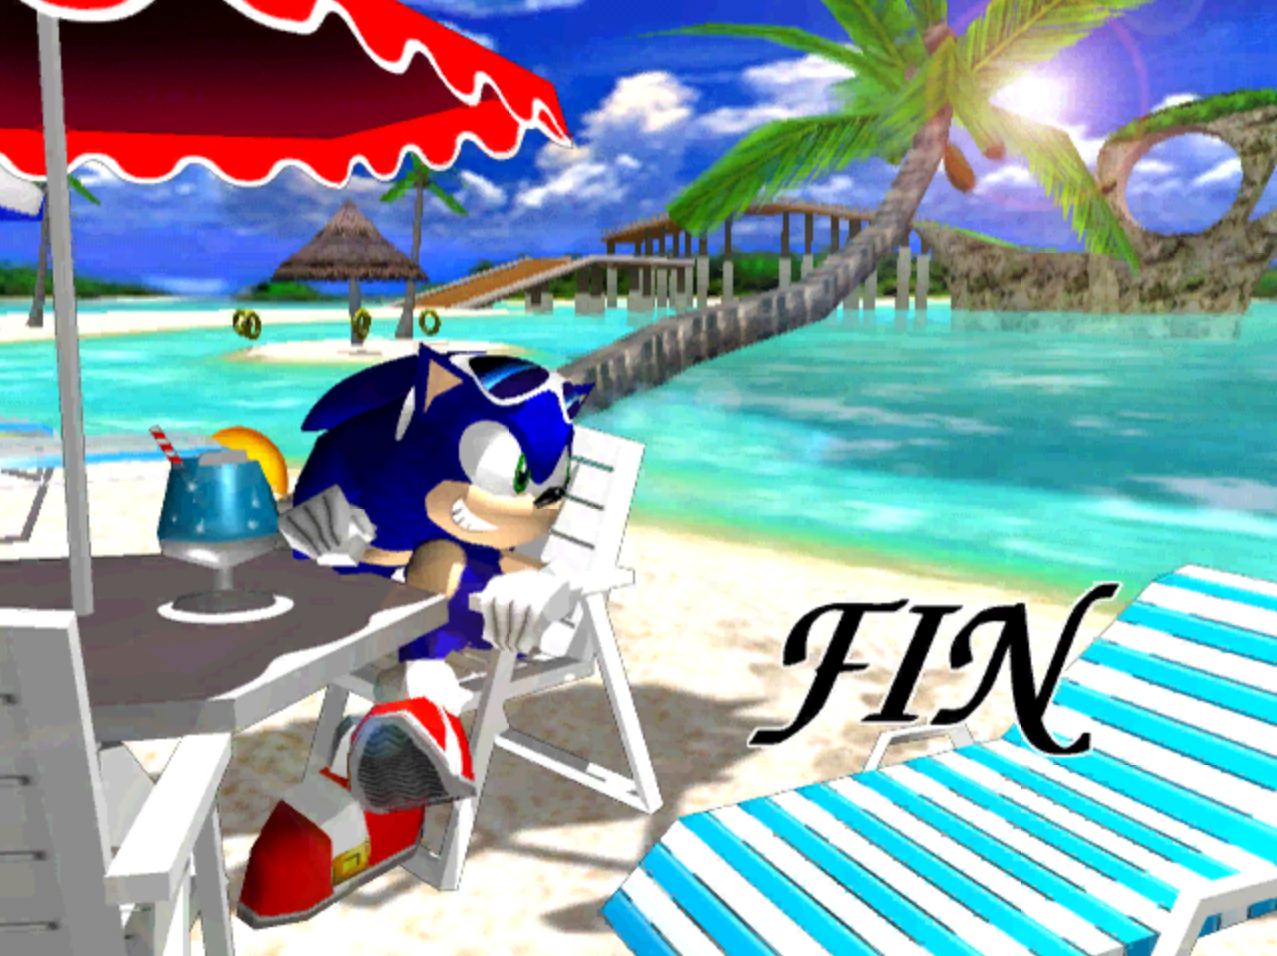 the ending image of the sonic adventure 1 sonic story